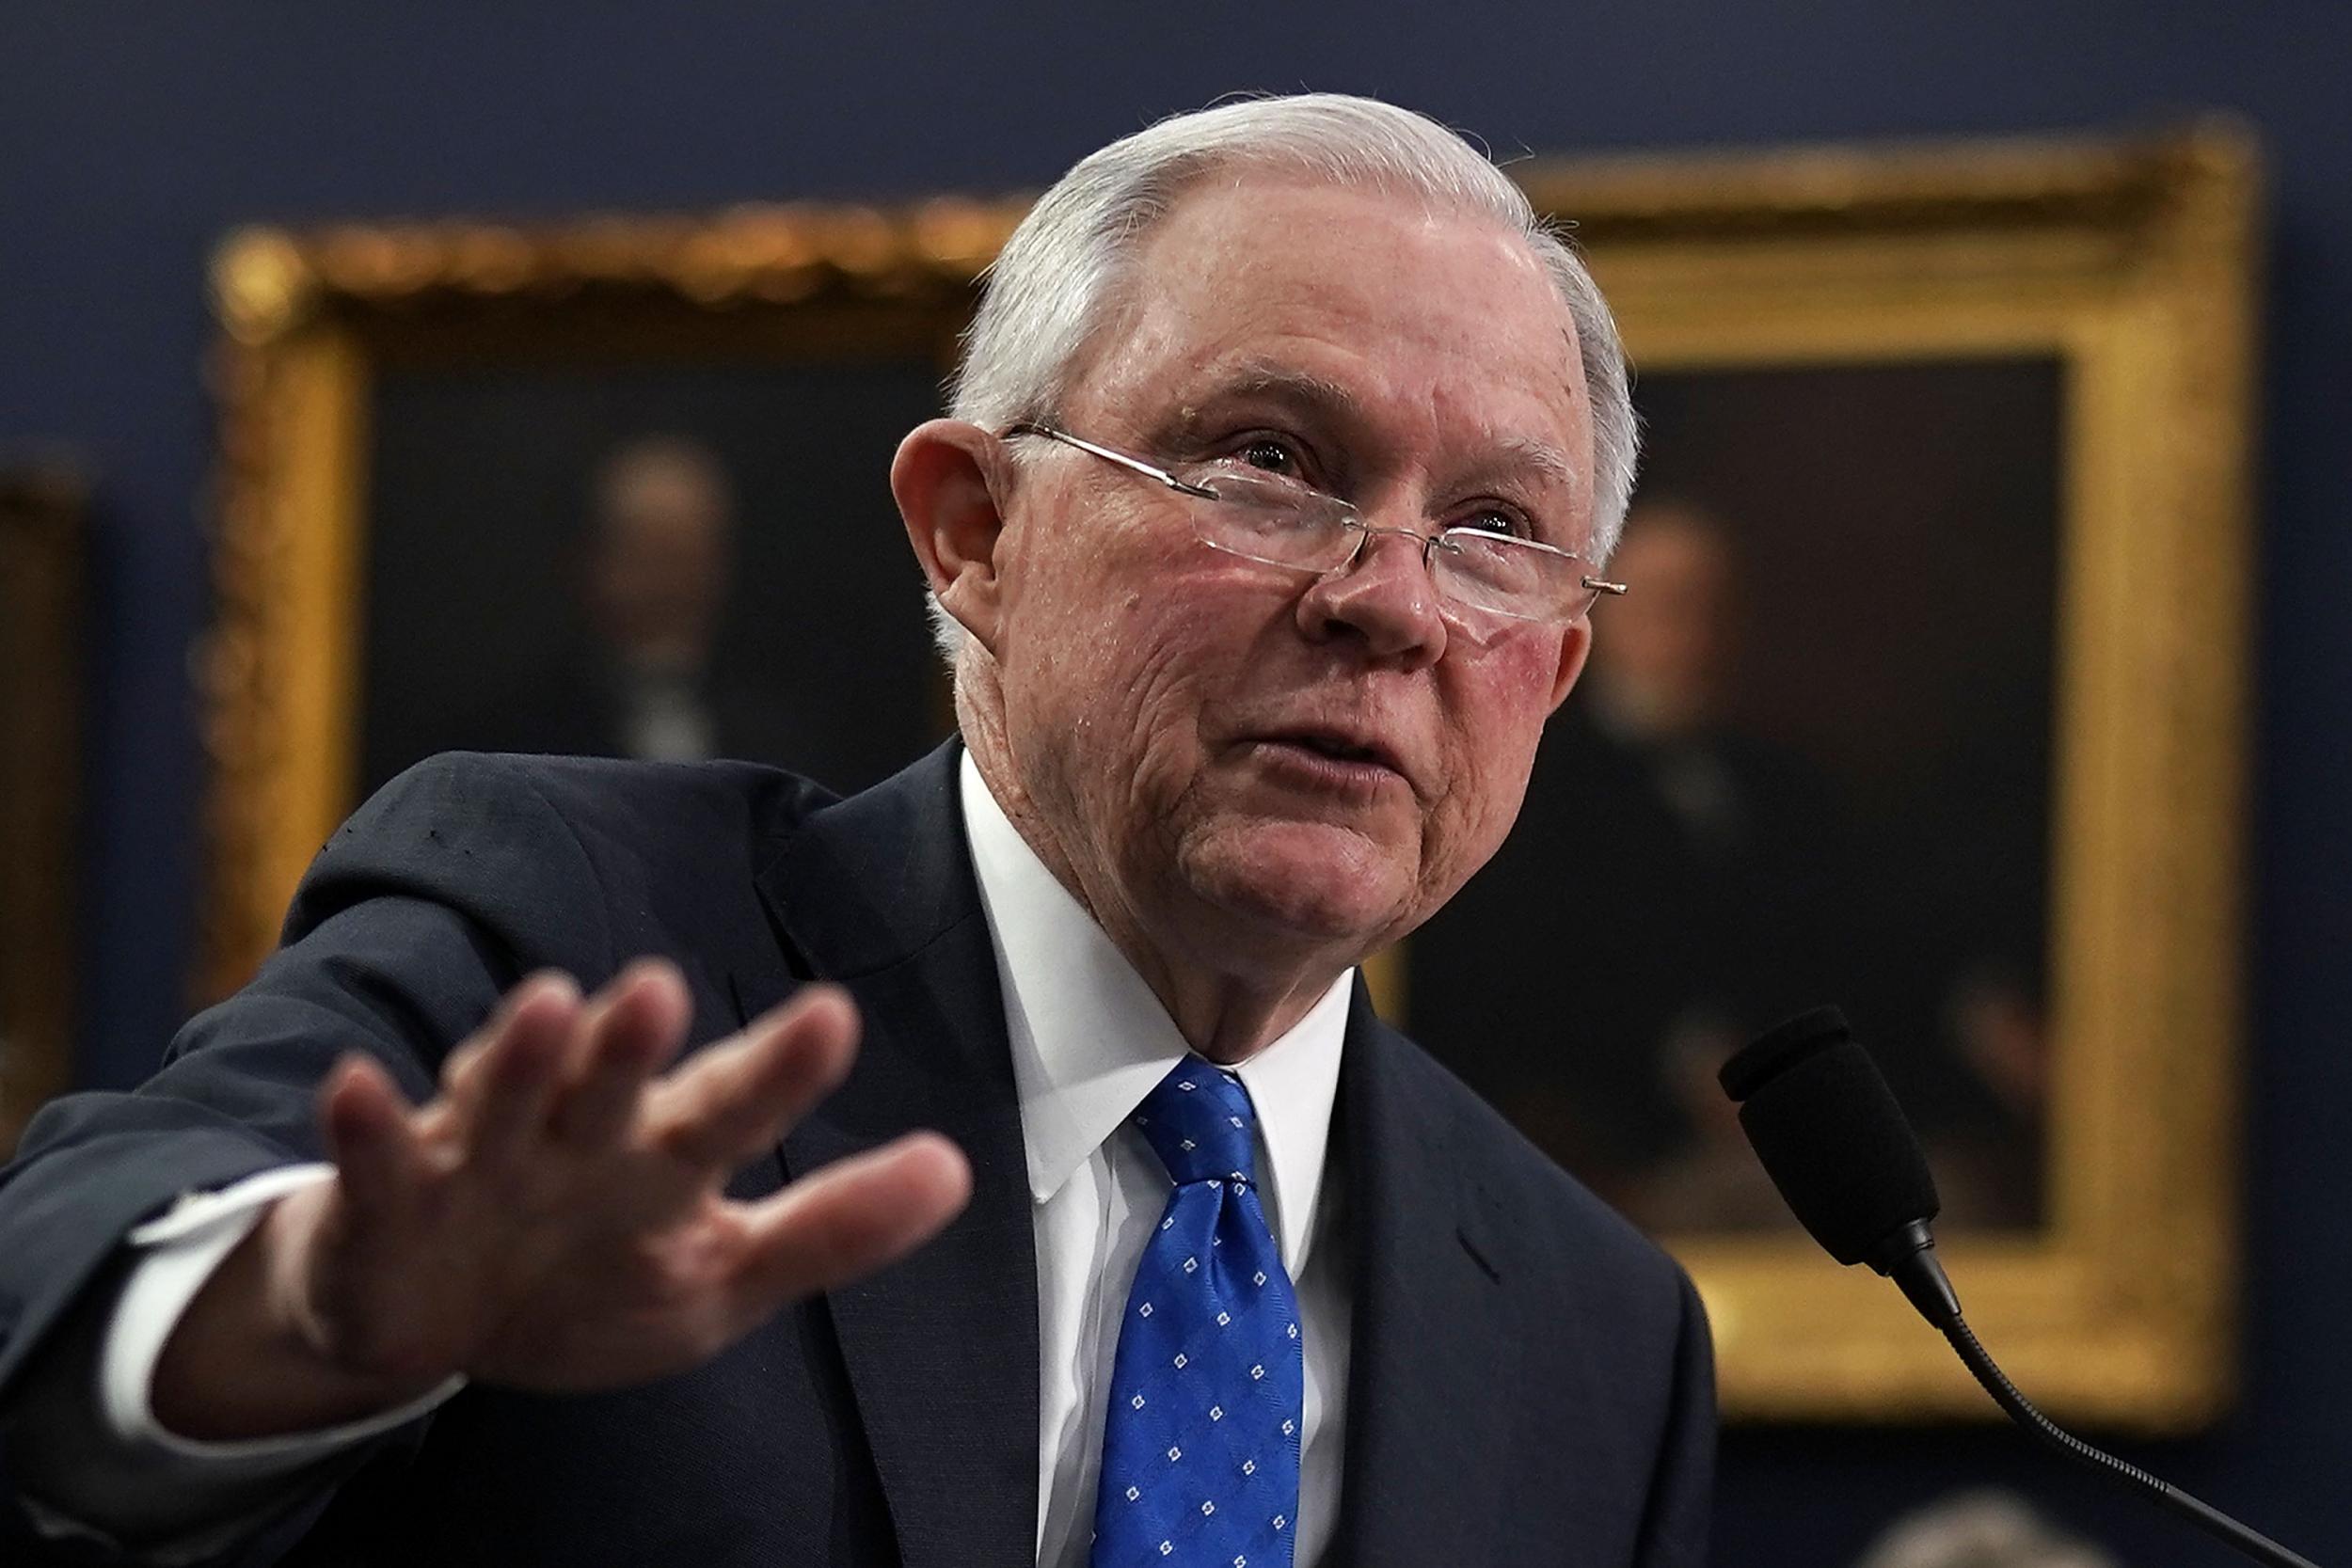 The new directive on asylum comes from Attorney Jeff Sessions